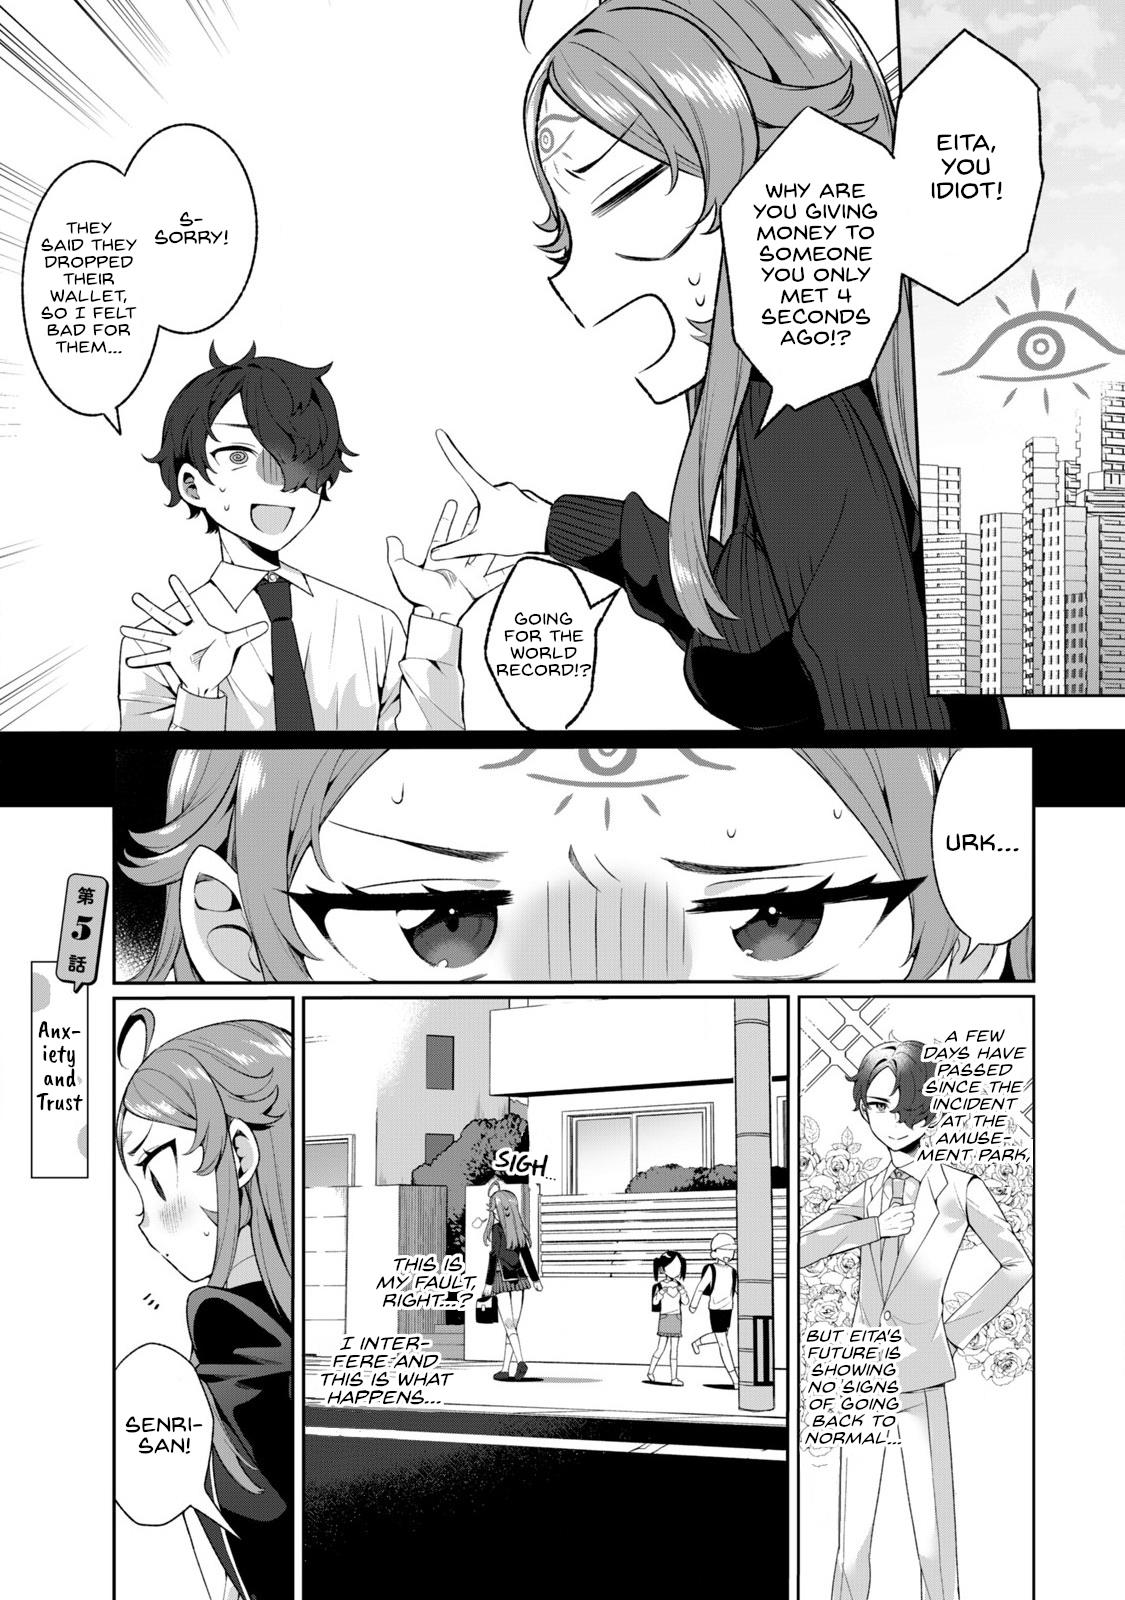 Koi To Senrigan To Aonisai Vol.1 Chapter 5: Anxiety And Trust. - Picture 1